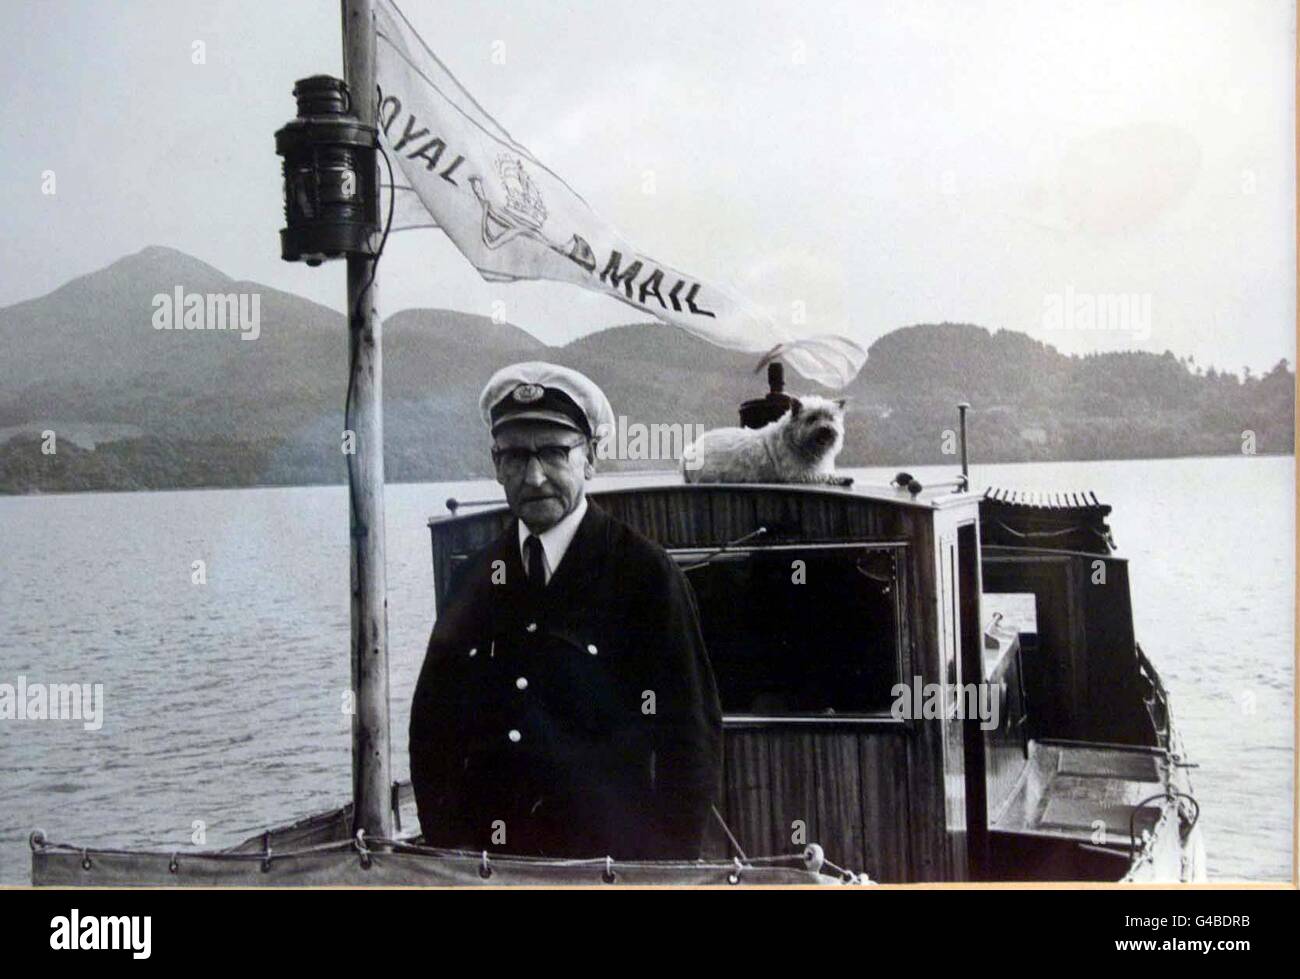 Sandy Macfarlane's grandfather Alex (right) delivering the post on Loch Lomond . For 50 years, three generations of the Macfarlane family have been delivering mail to people living on tiny islands dotted on Loch Lomond from thier boatyard at Bamaha. EDI Photo by Chris Bacon/PA Stock Photo